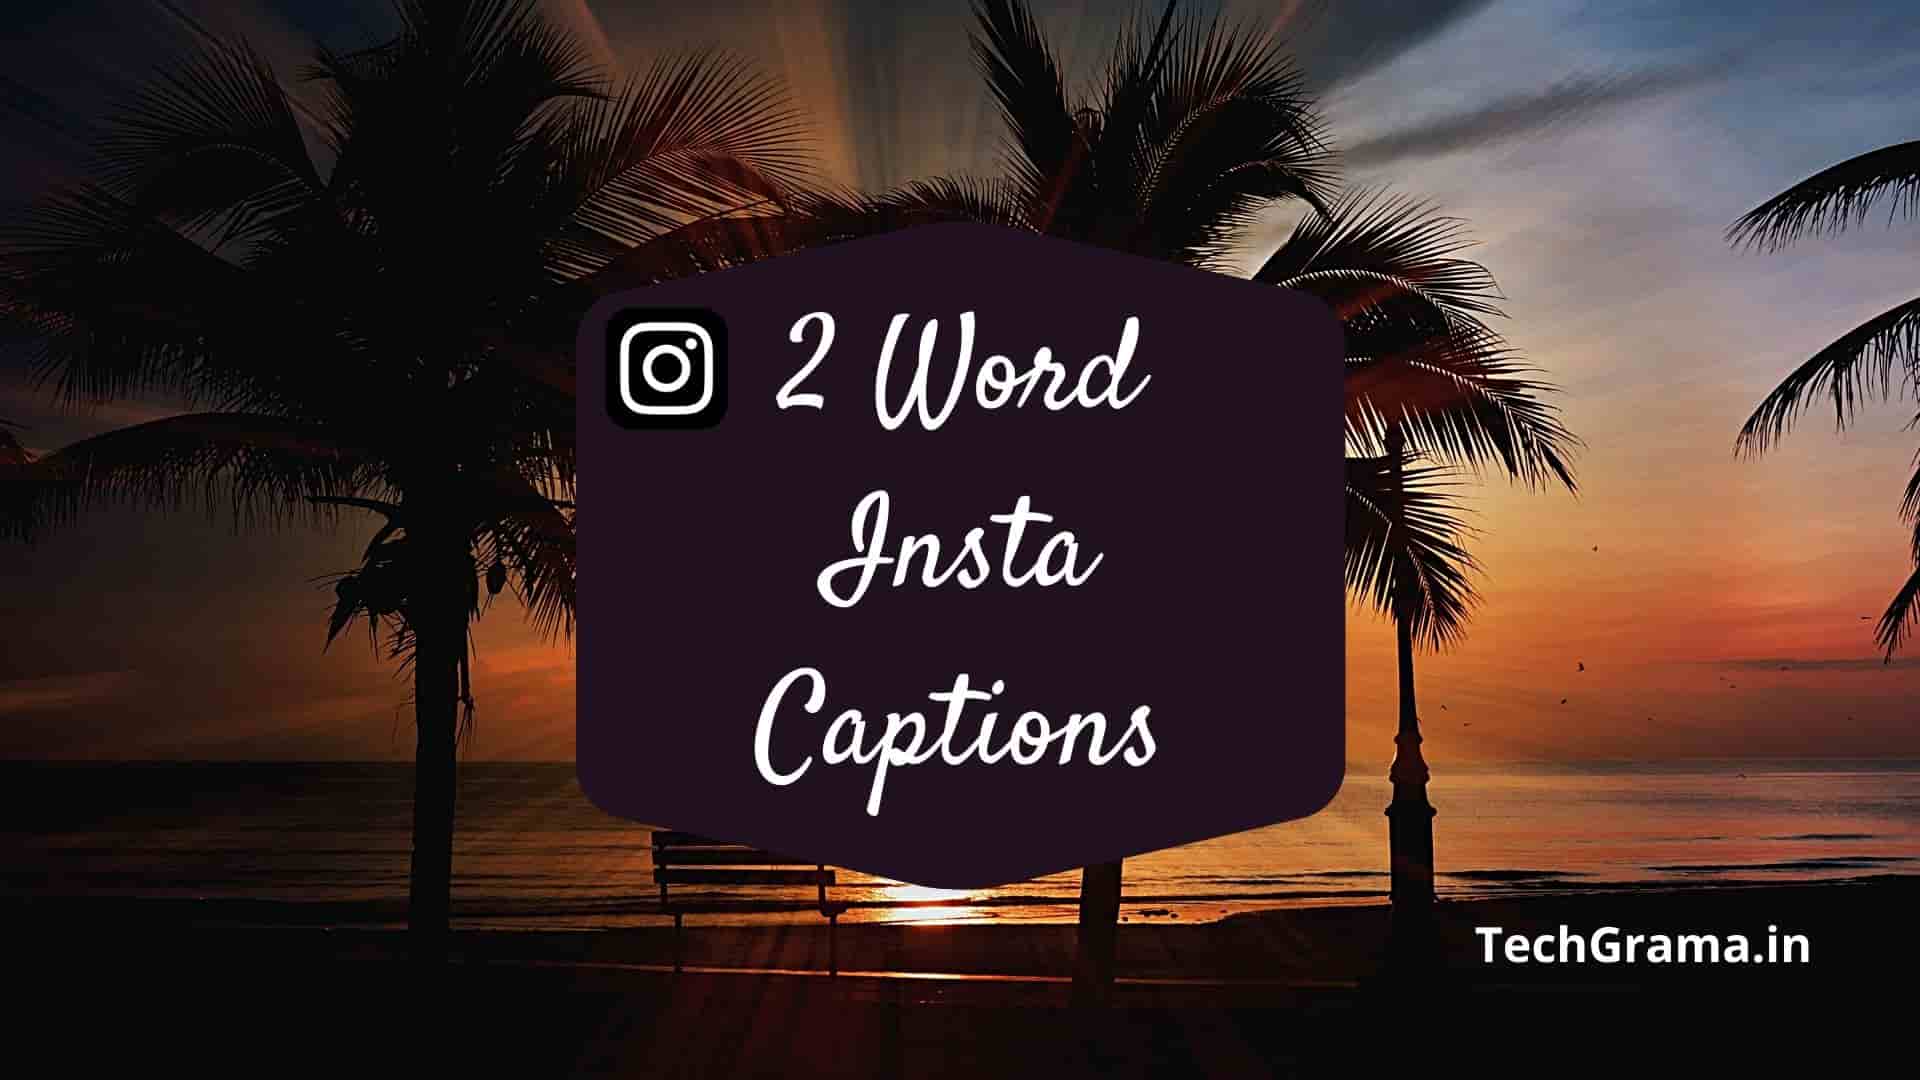 two word captions for instagram, 2 word captions for instagram, two word captions for instagram pictures, two word instagram captions, 2 word insta captions, instagram captions 2 words, best 2 word captions, 2 word sassy captions, two word captions for friends, savage 2 word captions for instagram, two word attitude captions for instagram, two word captions for instagram for boy and girl, two word hindi captions for instagram, one or two word captions for instagram